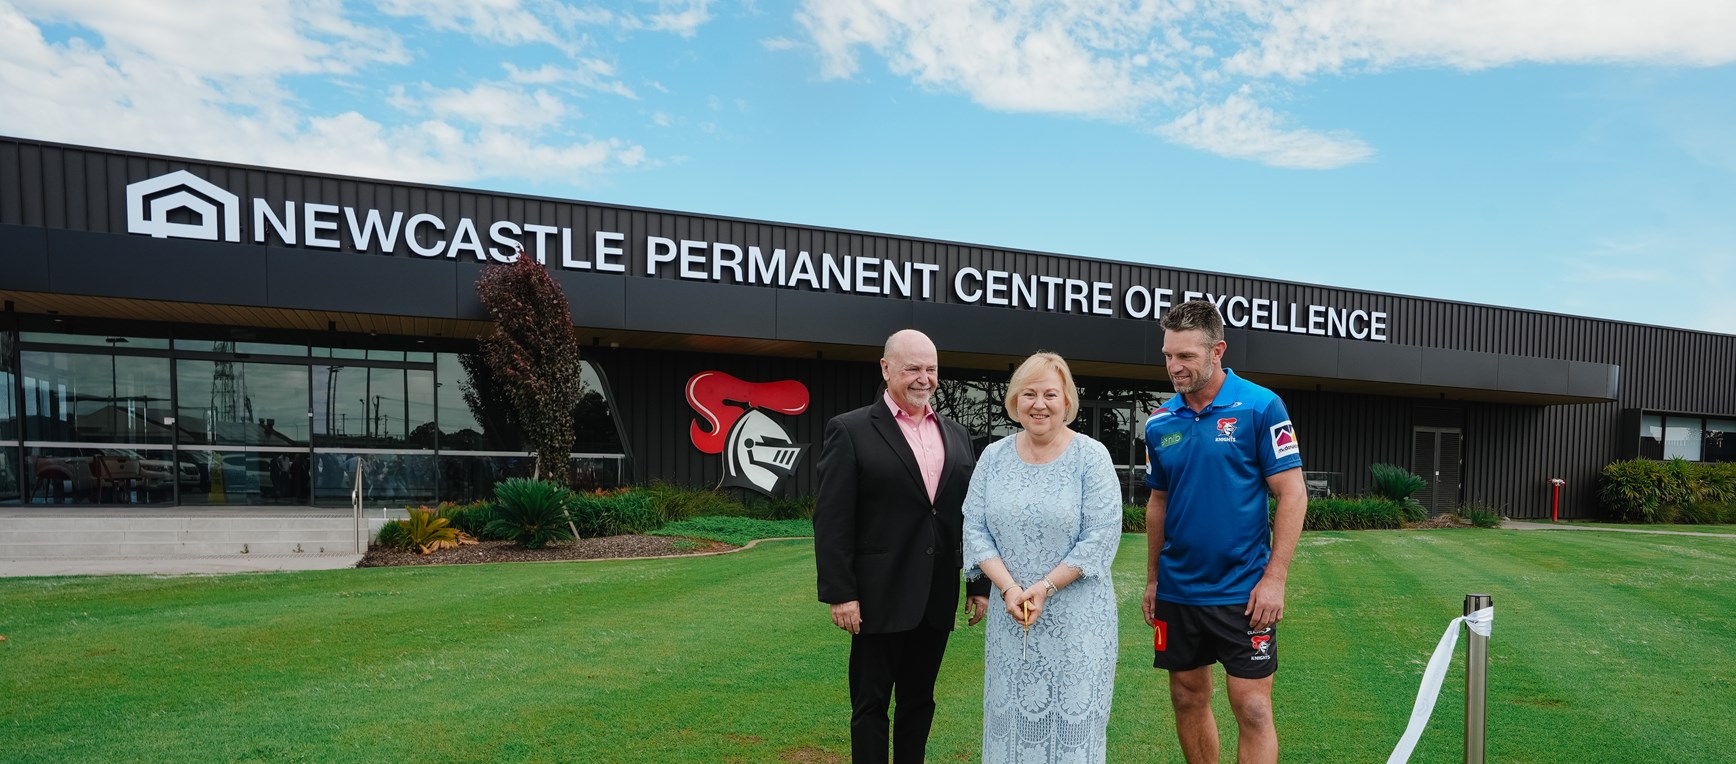 Gallery: The official Newcastle Permanent Centre of Excellence